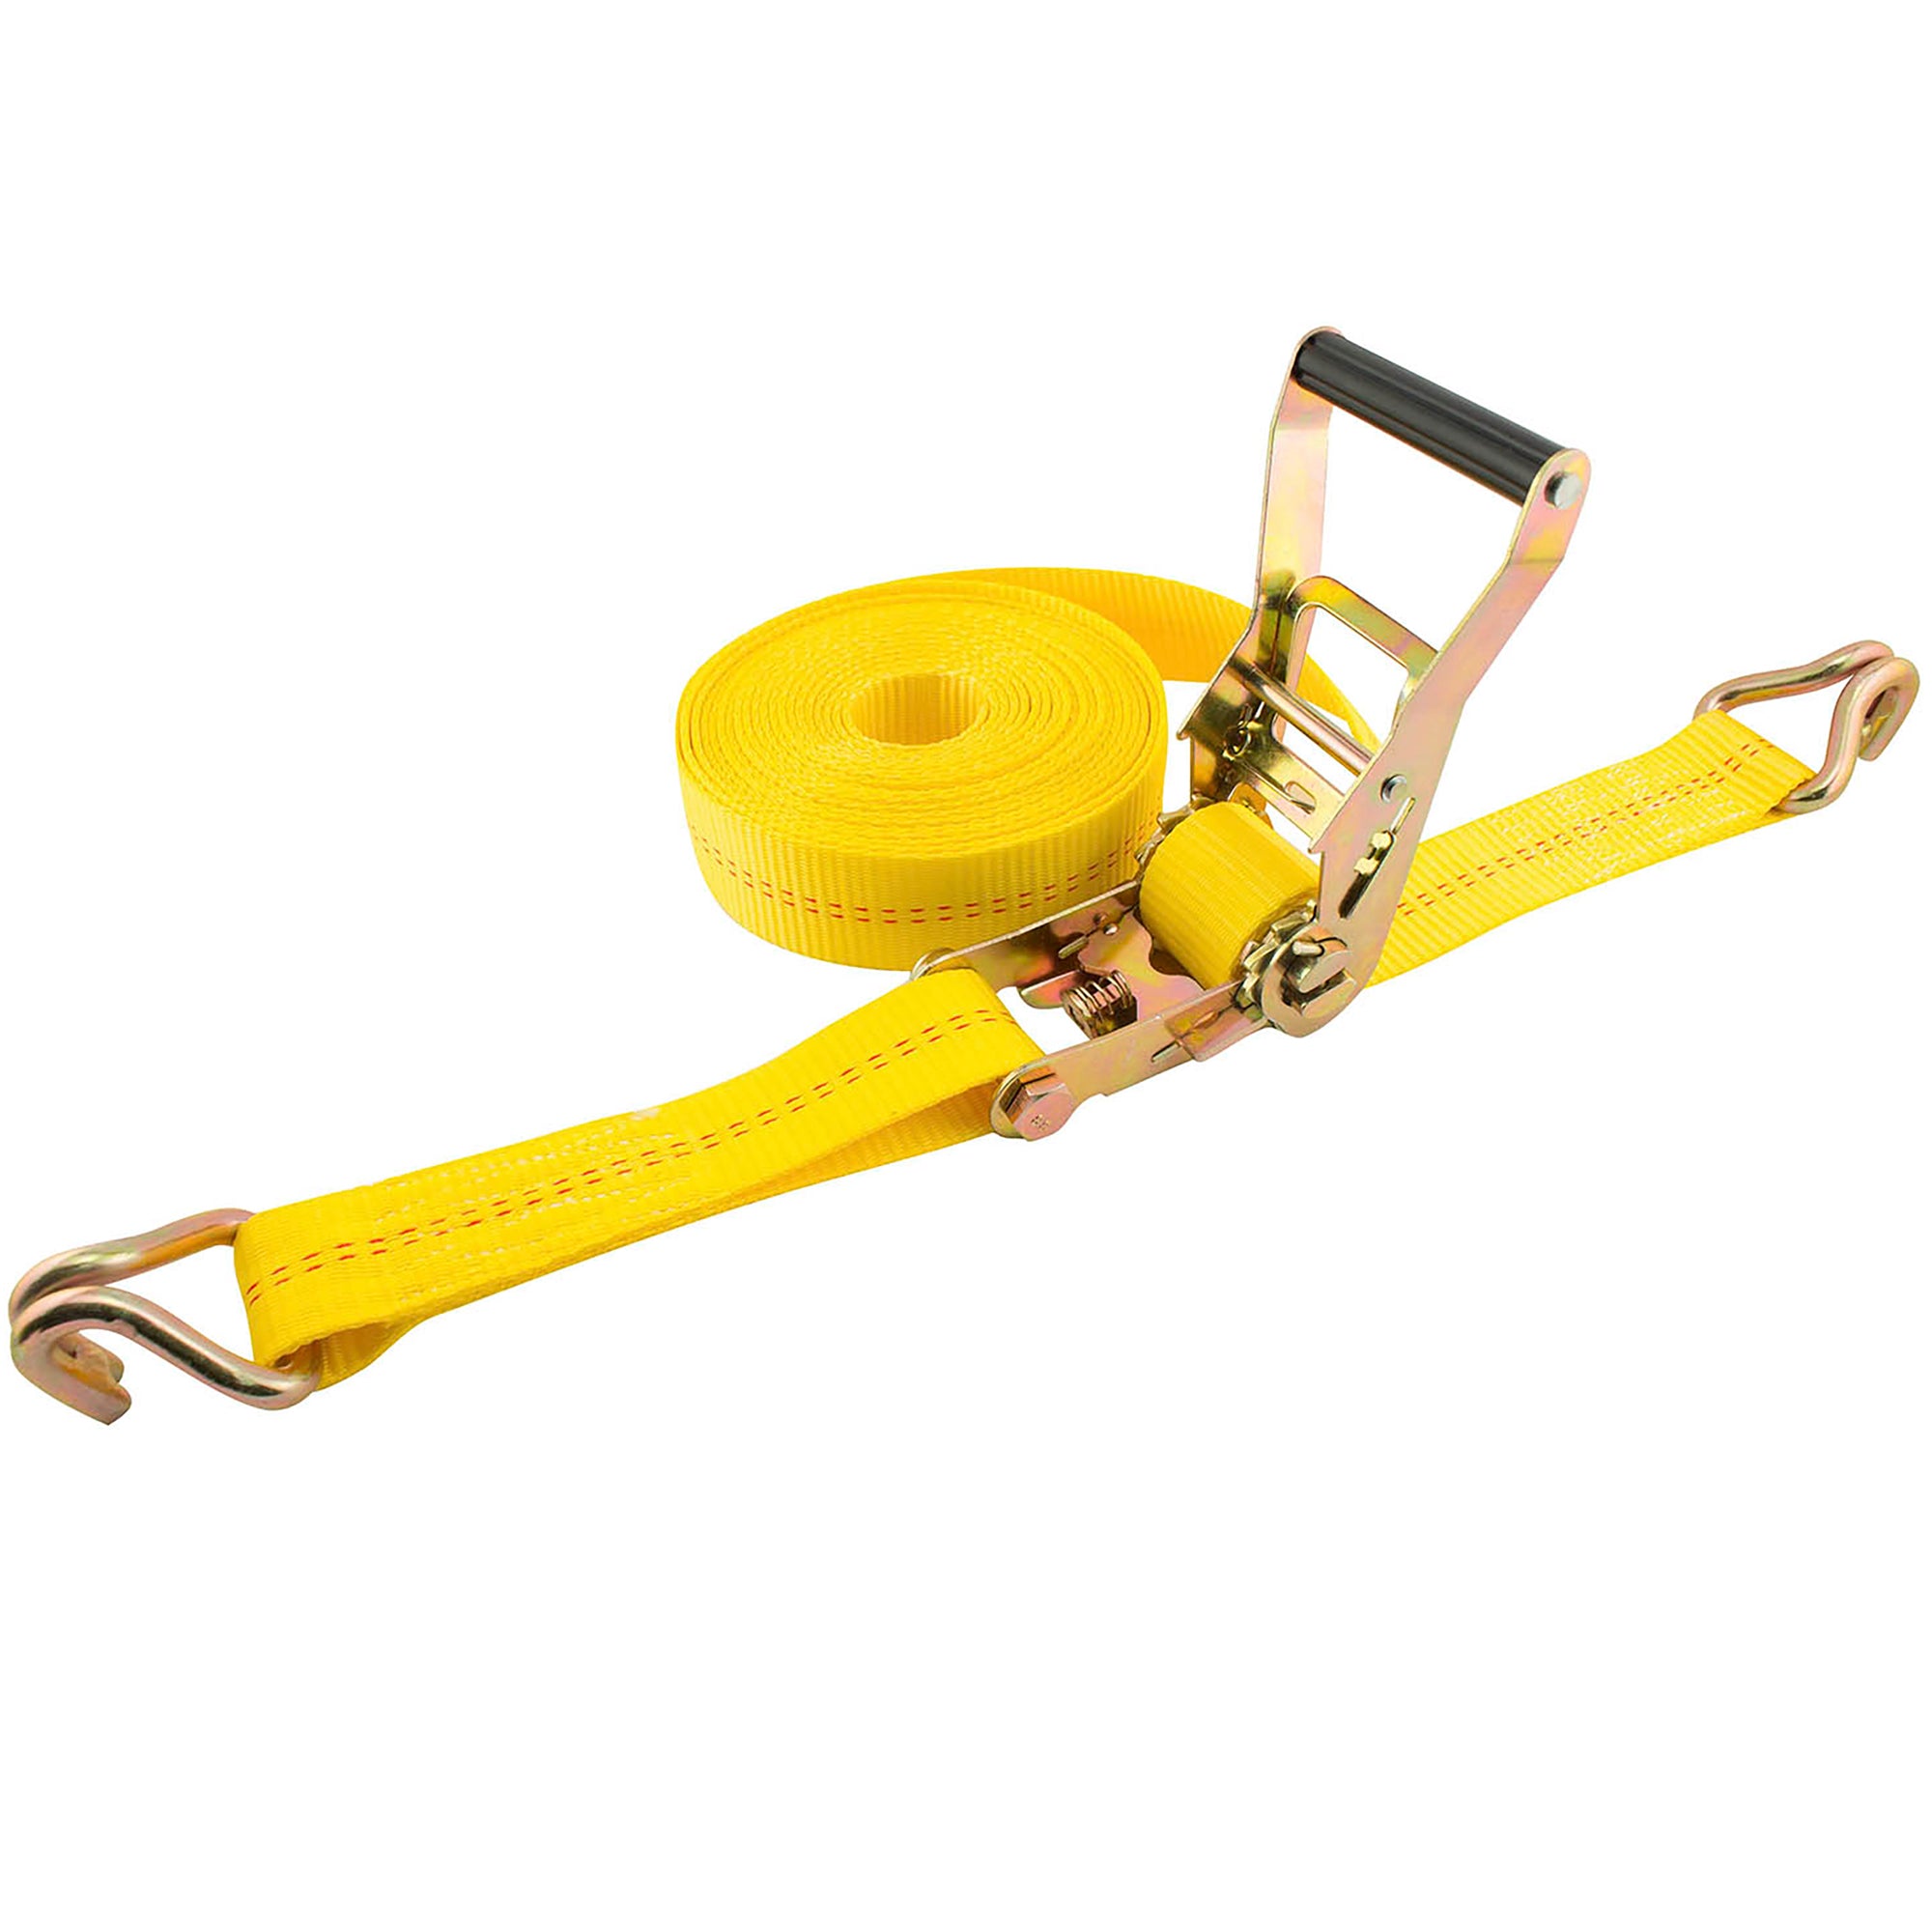 Double J Winch Ratchet Straps 2"X27' 10,000 lb Load Rating WL 3300 Lbs